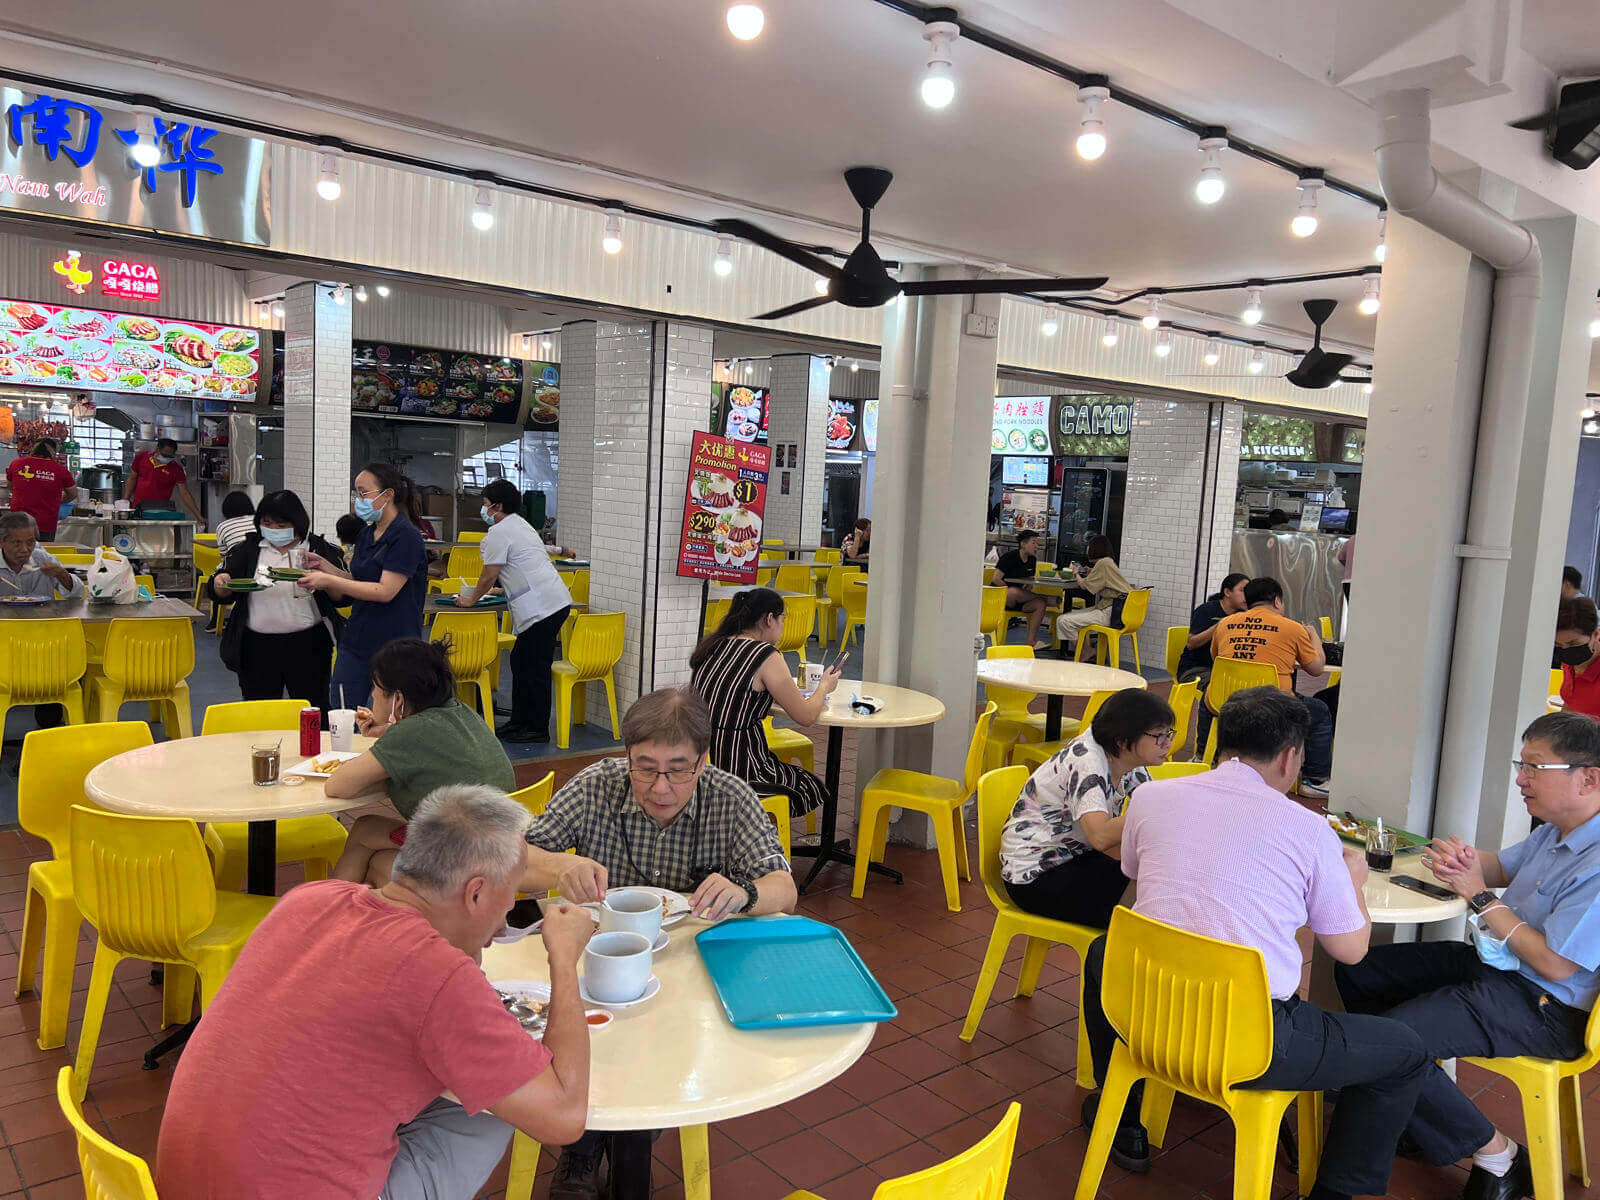 929 Tampines COFFEE SHOP Stall!!!! 咖啡店摊位出租 DIFFERENT LOCATIONS 